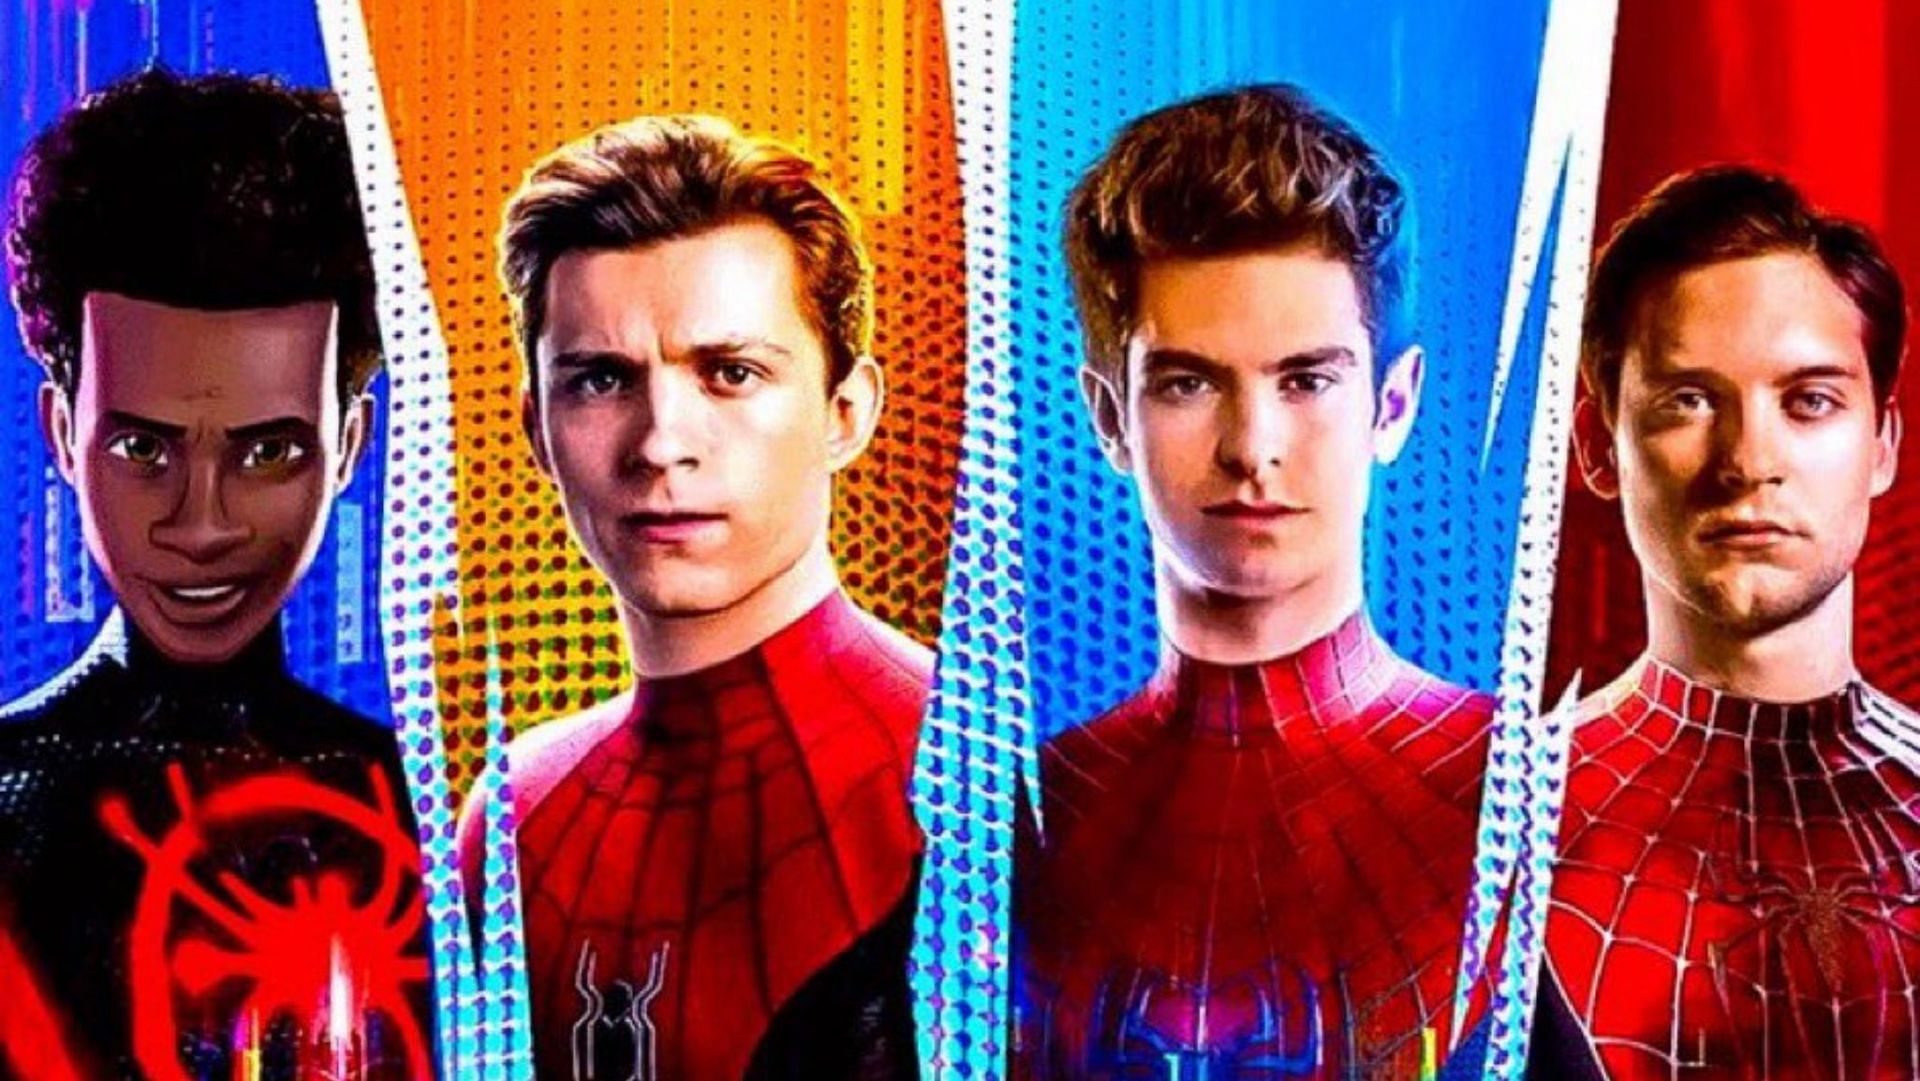 Sony Pictures proudly presents a vibrant, new poster featuring the key protagonists from the Spider-Verse (Image via Sony)